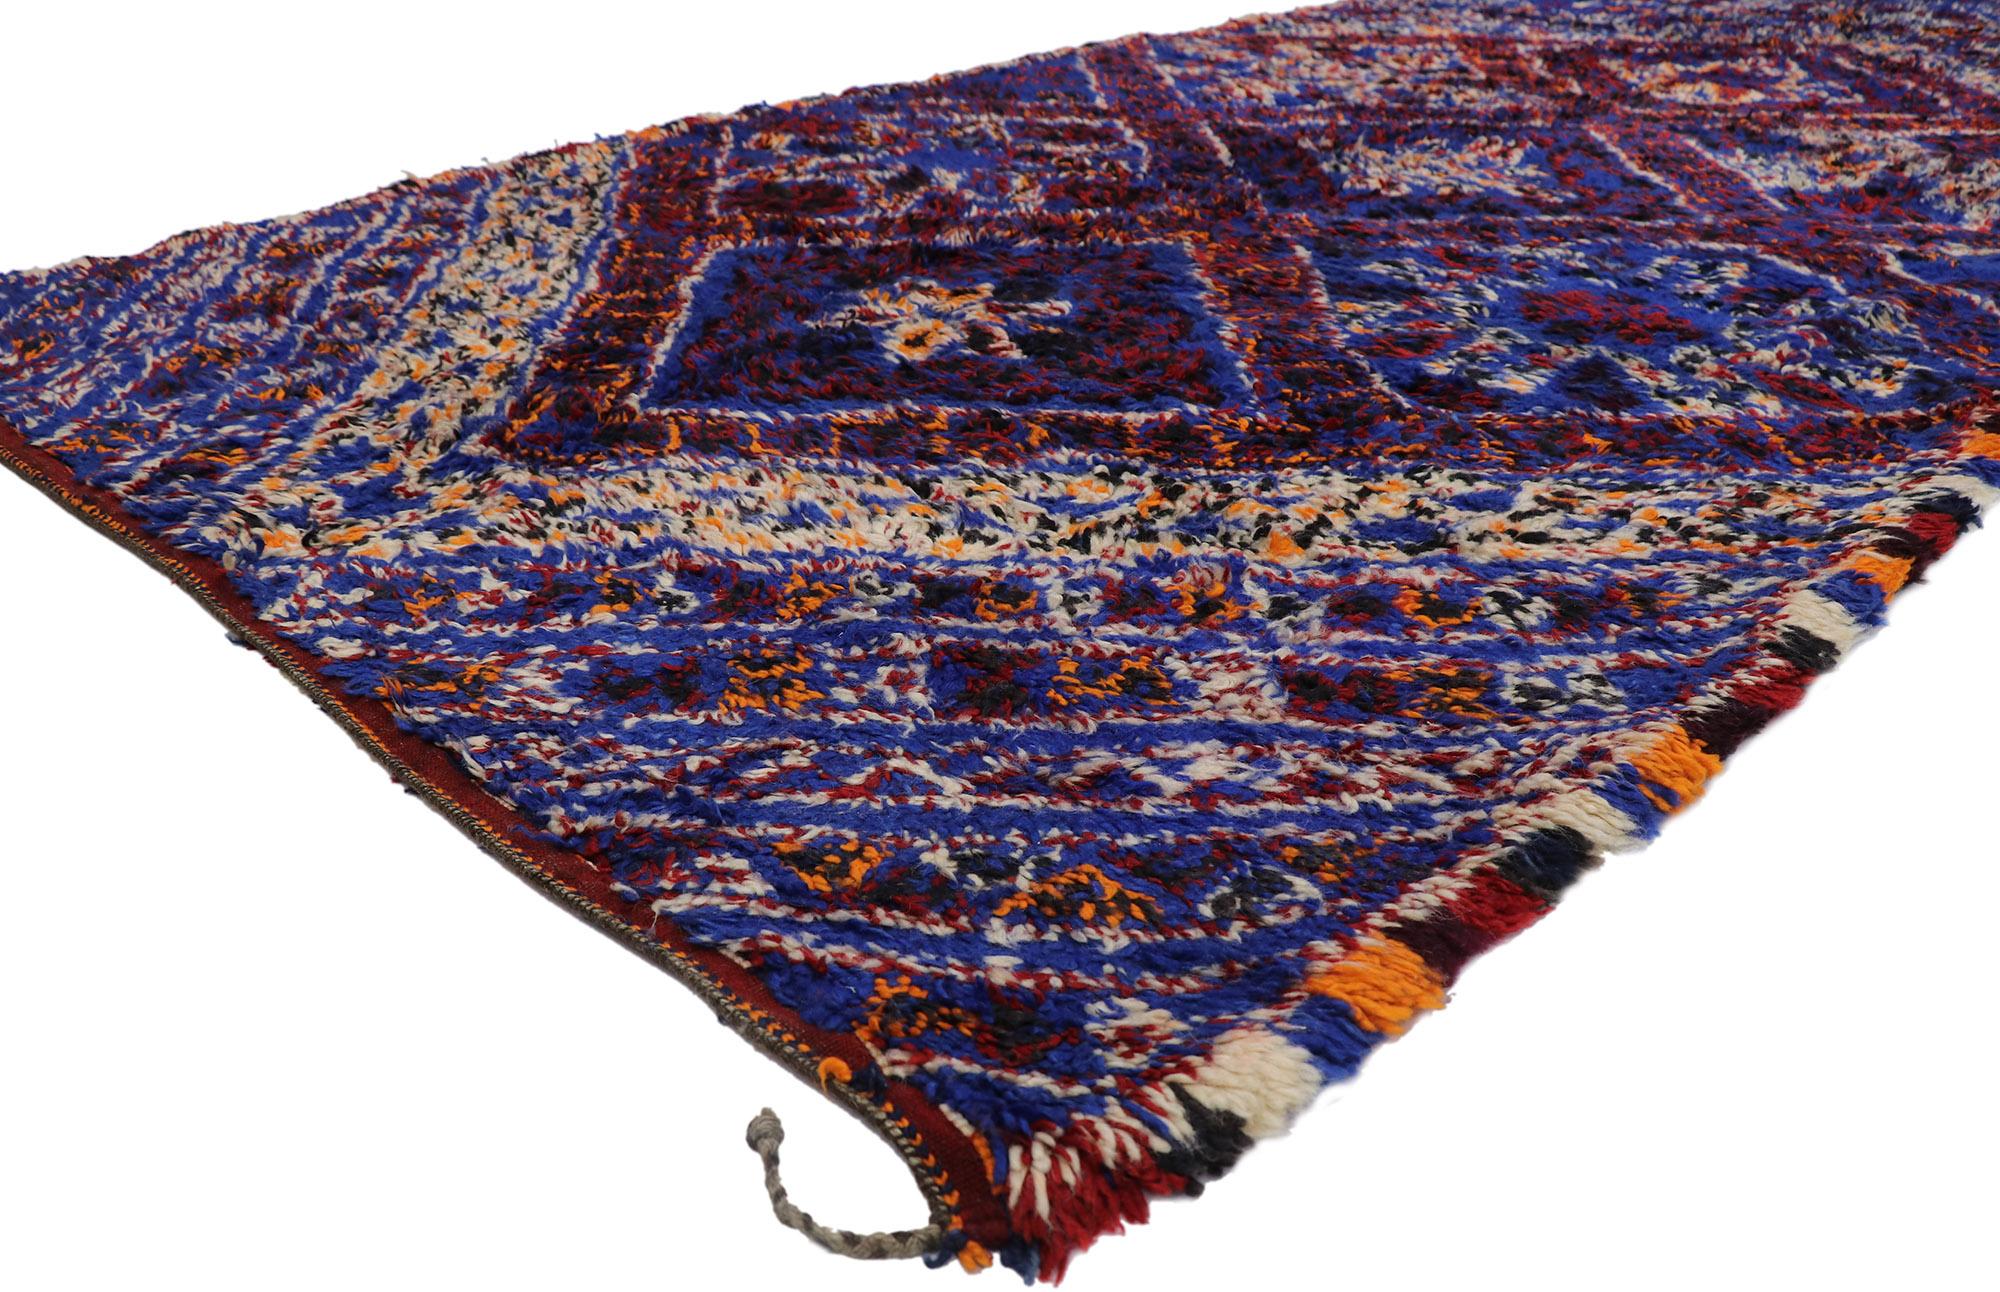 21215 Vintage Berber Beni M'Guild Moroccan rug with Tribal Style 06'03 x 12'10. Showcasing a bold expressive design, incredible detail and texture, this hand knotted wool vintage Berber Beni M'Guild Moroccan rug is a captivating vision of woven